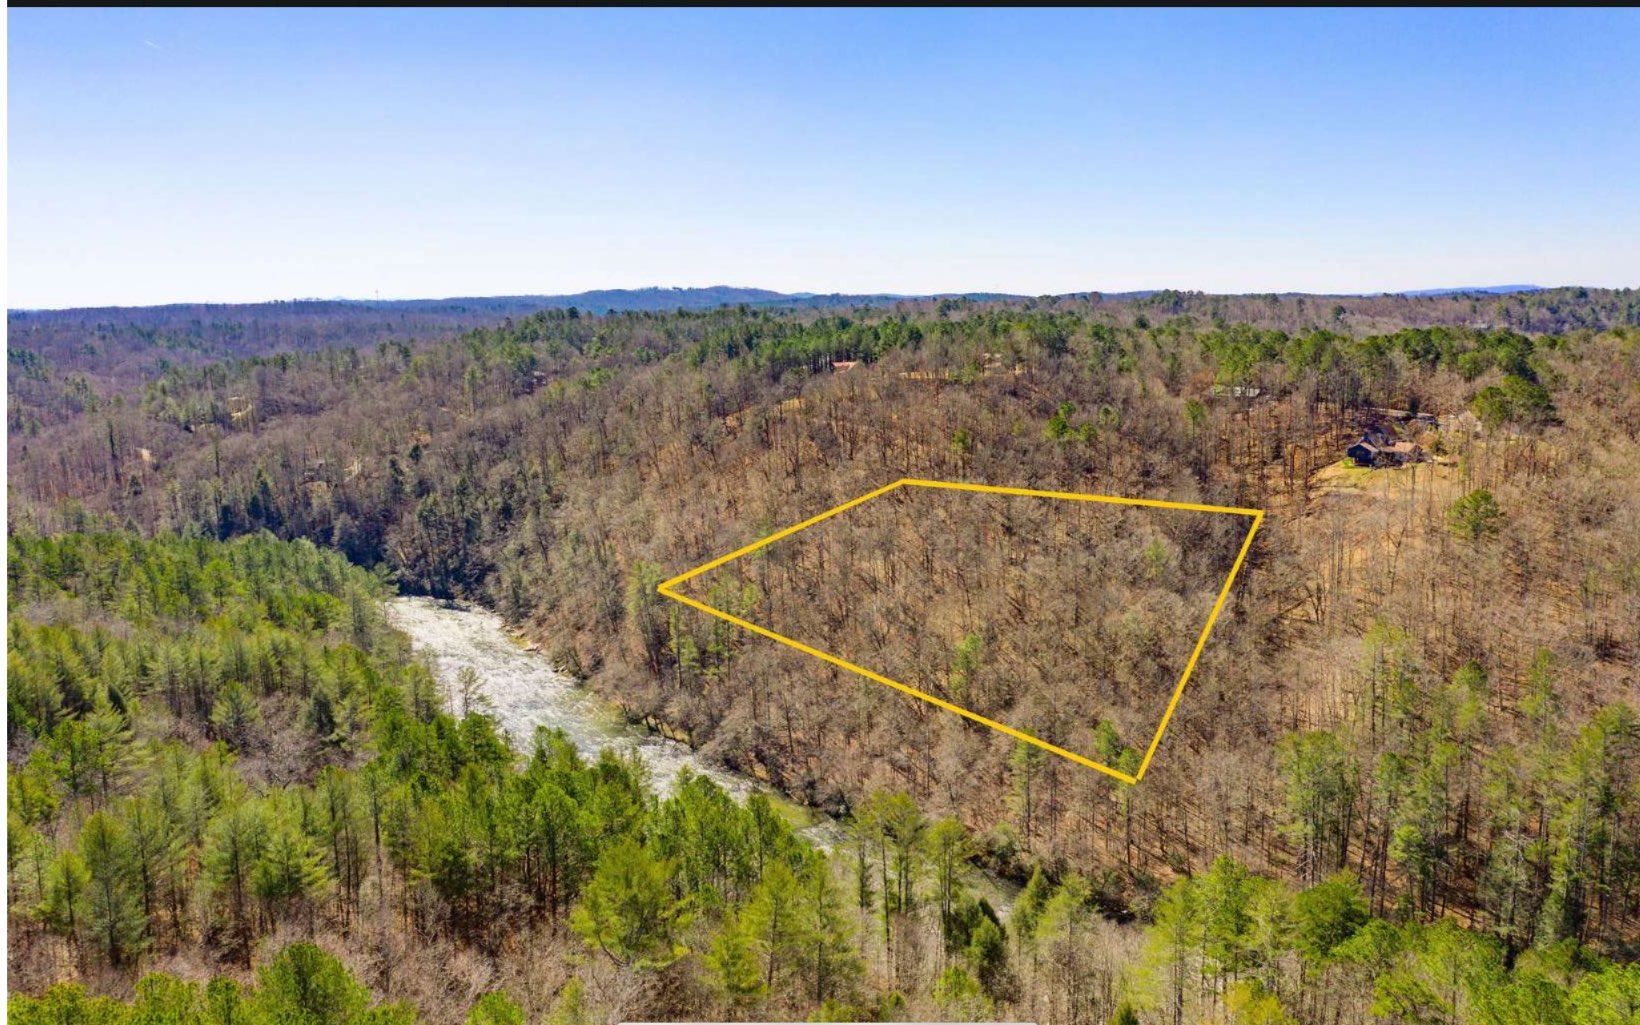 RARE opportunity to own a total of 4 ACRES consisting of two adjoining tracts & multiple build sites, one .87 lot providing access to the much desired Coosawattee River Resort and all the amenities, the other being unrestricted property that allows you deeded access to the Coosawattee River below. Tract 2 contains a 3.14 ac with 4 noisy white water rapids, 605 ft that borders Corp of Engineers property leading into the Carter's Lake Reservoir. Amazing sunsets & sunrises, abundance of wildlife, easy gated access, first class resort amenities and the river in your backyard gives you the best of both worlds.